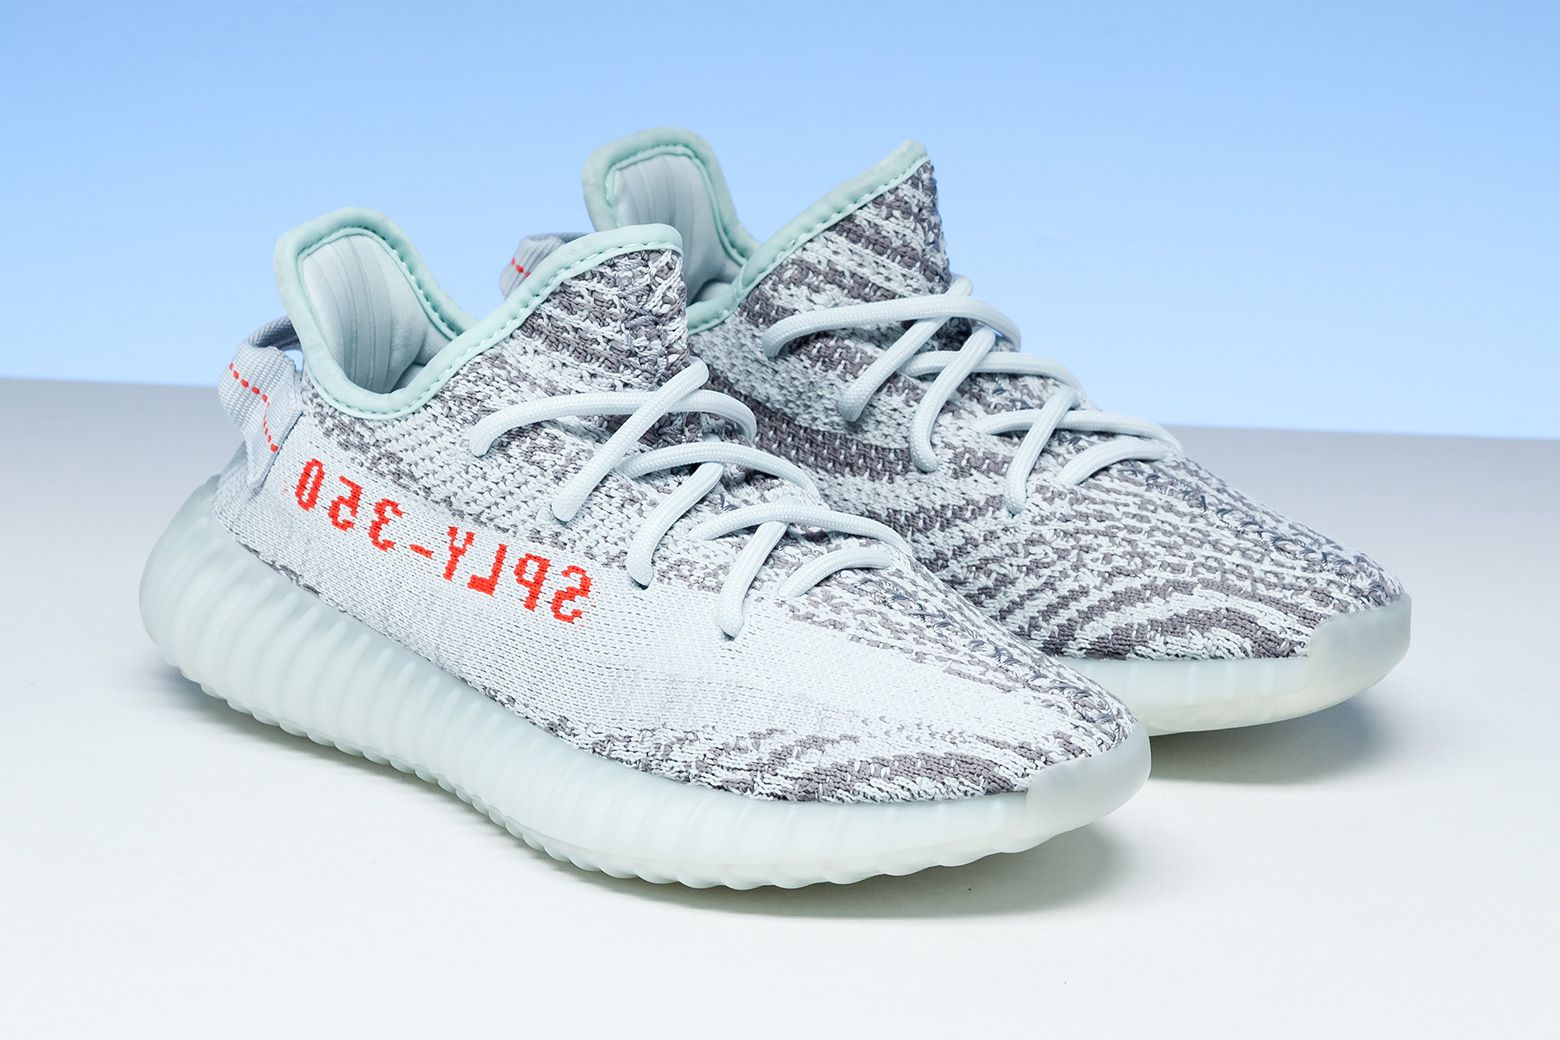 Goods on Twitter: "Rate the Adidas Yeezy Boost 350 V2 “Blue Tint” 1 - 10. https://t.co/S4cJvAfiIS FREE domestic shipping! Offer expires 12/15 at 1 PM EST. https://t.co/E60Sar67tu" /